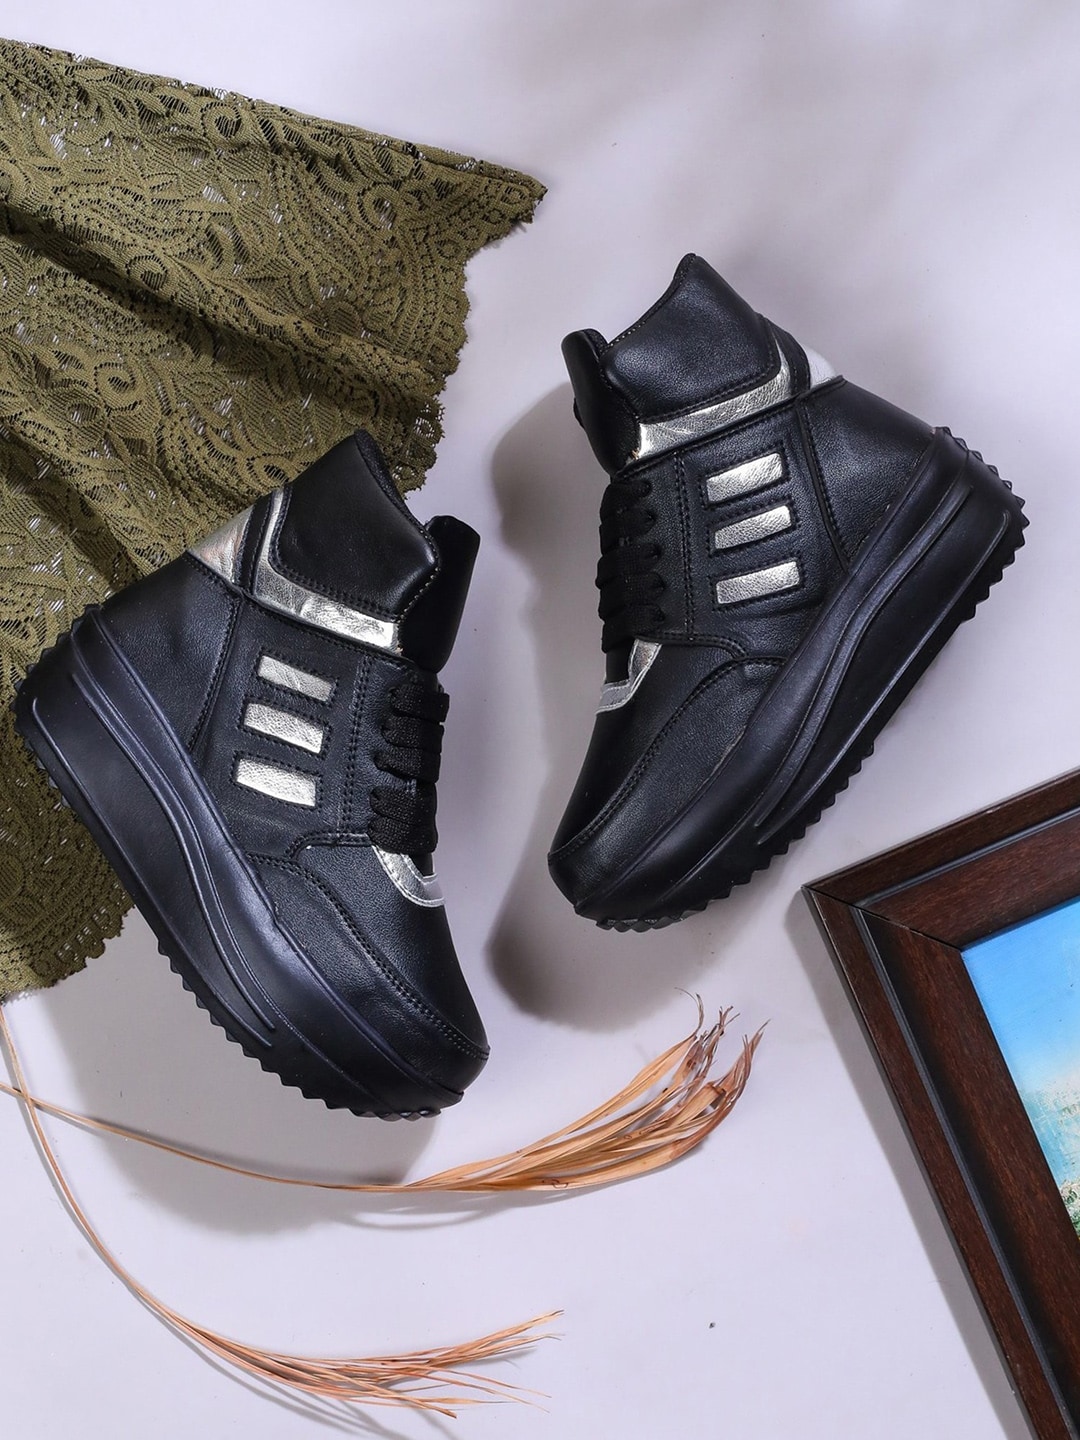 LONDON STEPS Women Black & Silver-Toned Striped High-Top Flatform Heeled Boots Price in India